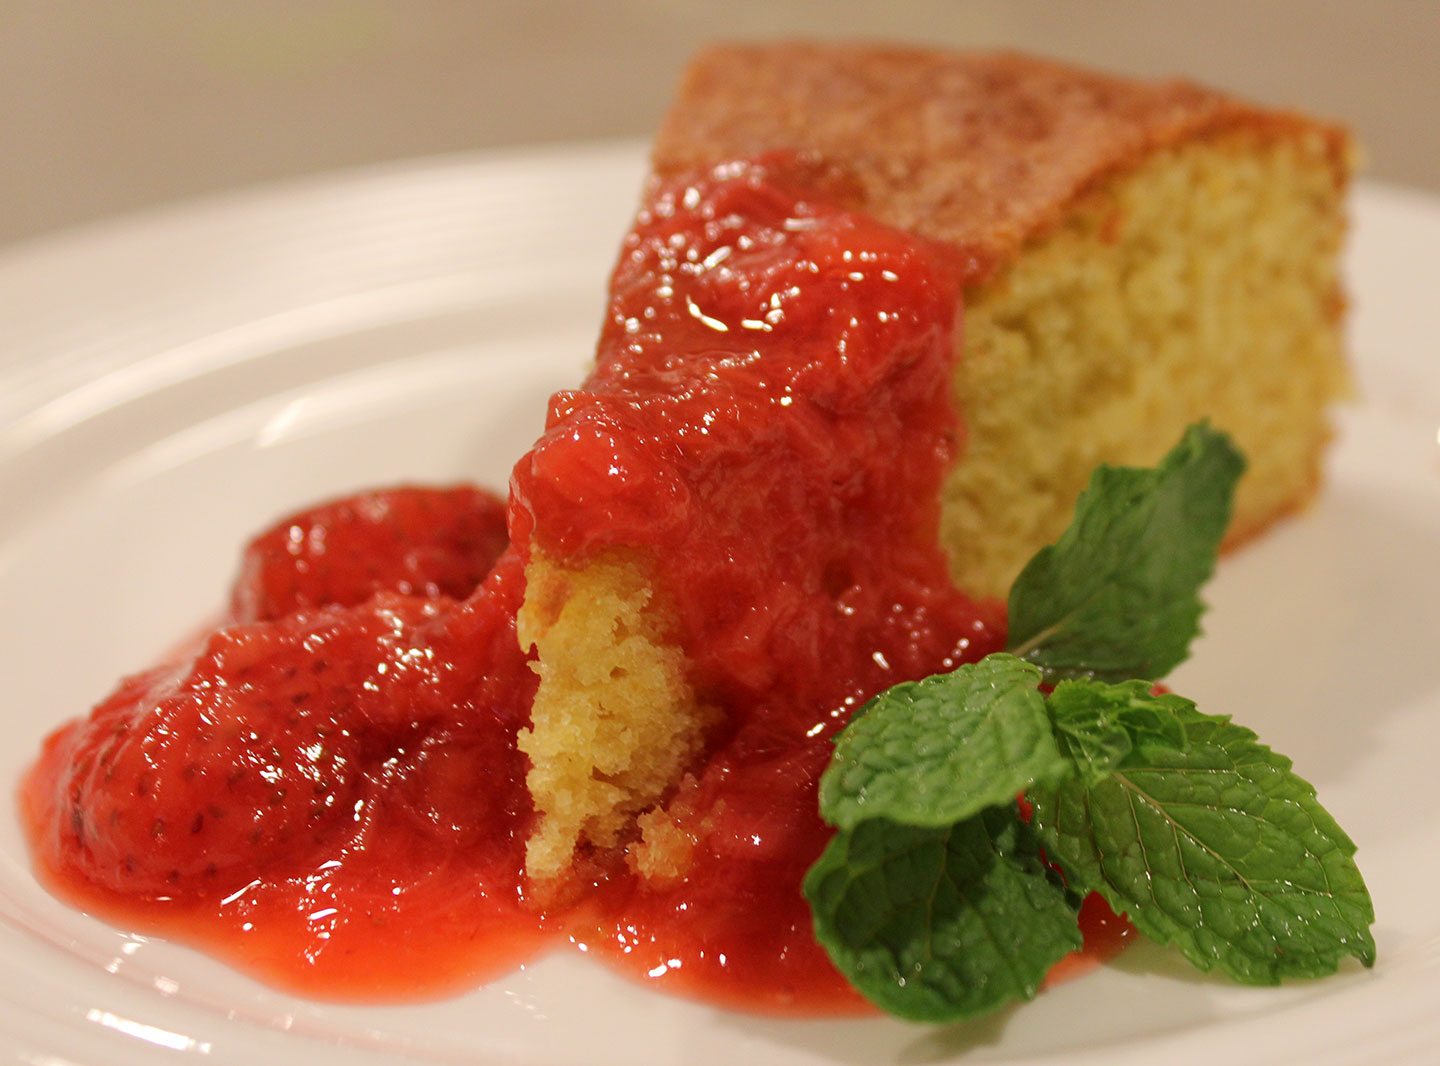 TBT Recipe: Olive Oil Cake with Strawberry Rhubarb Compote